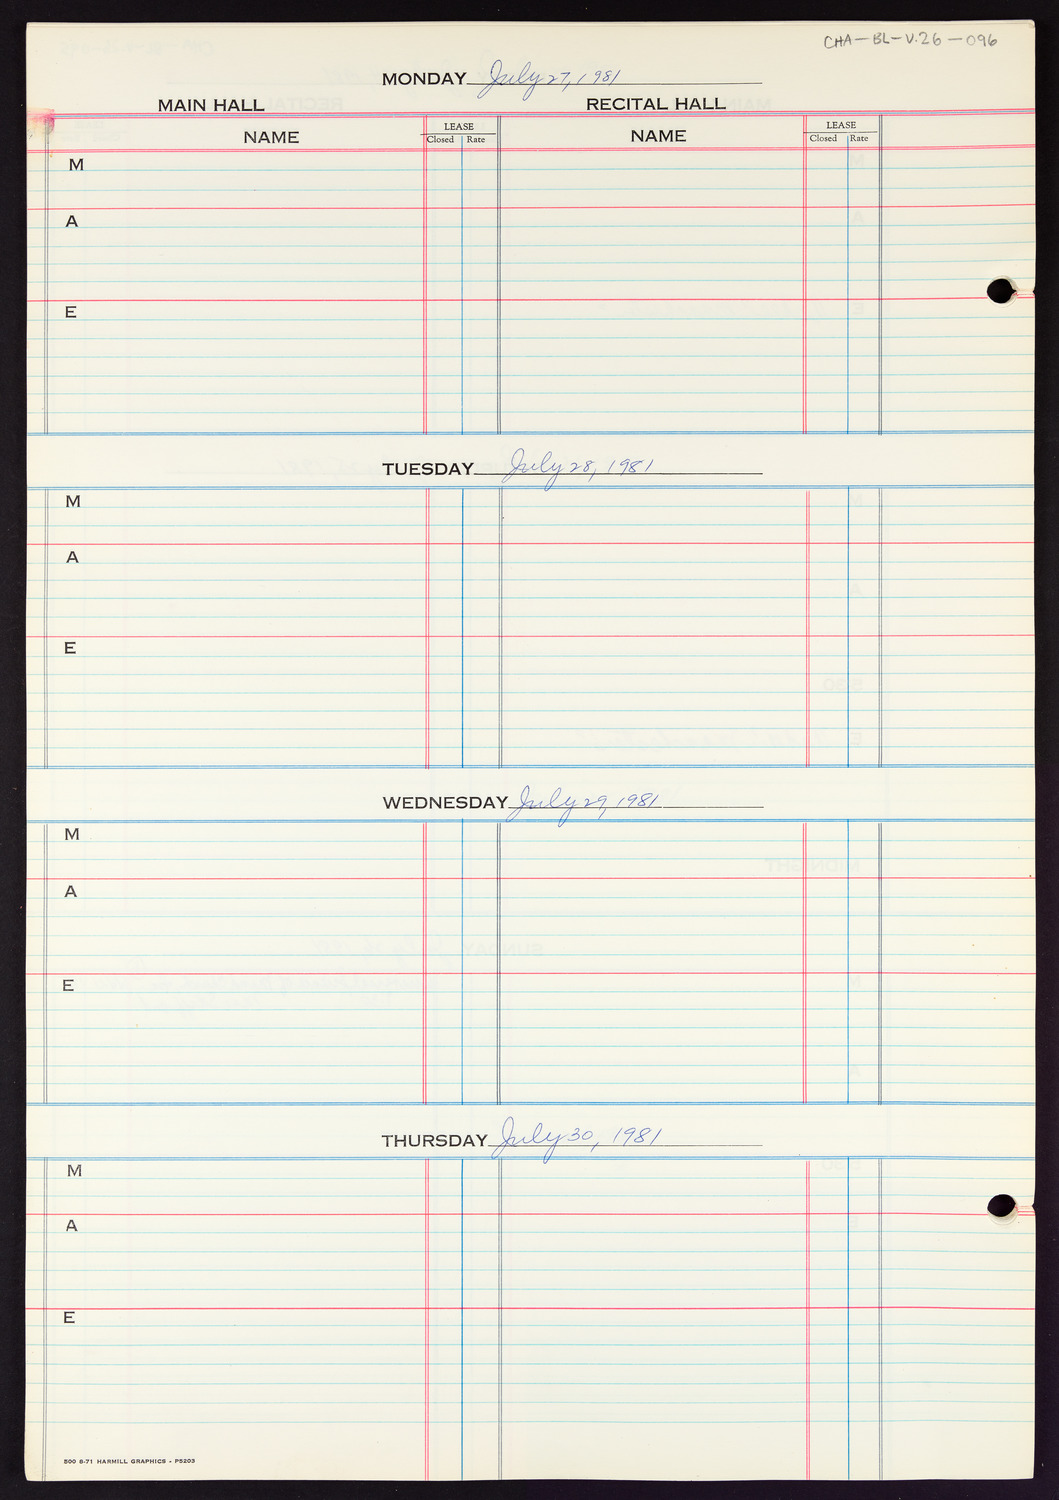 Carnegie Hall Booking Ledger, volume 26, page 96